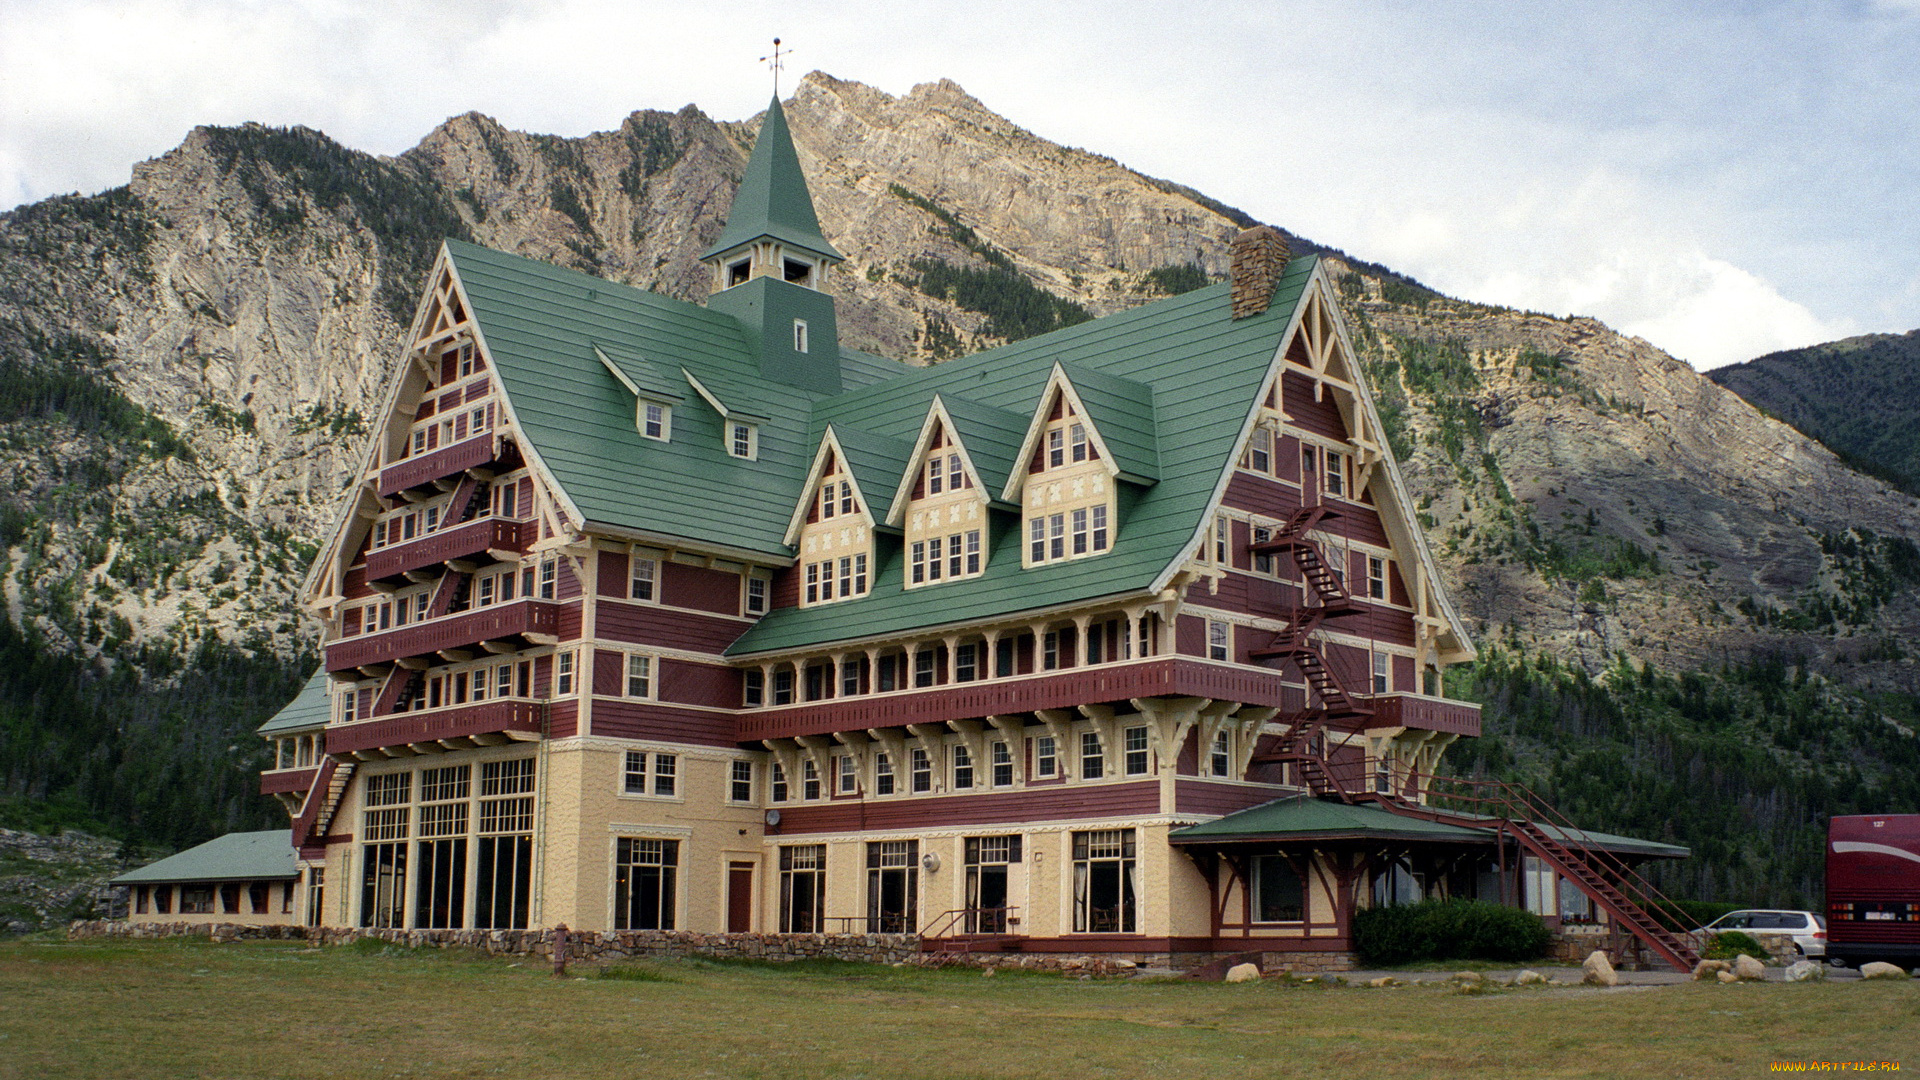 waterton, lakes, national, park, canada, prince, of, wales, hotel, города, здания, дома, гостиница, горы